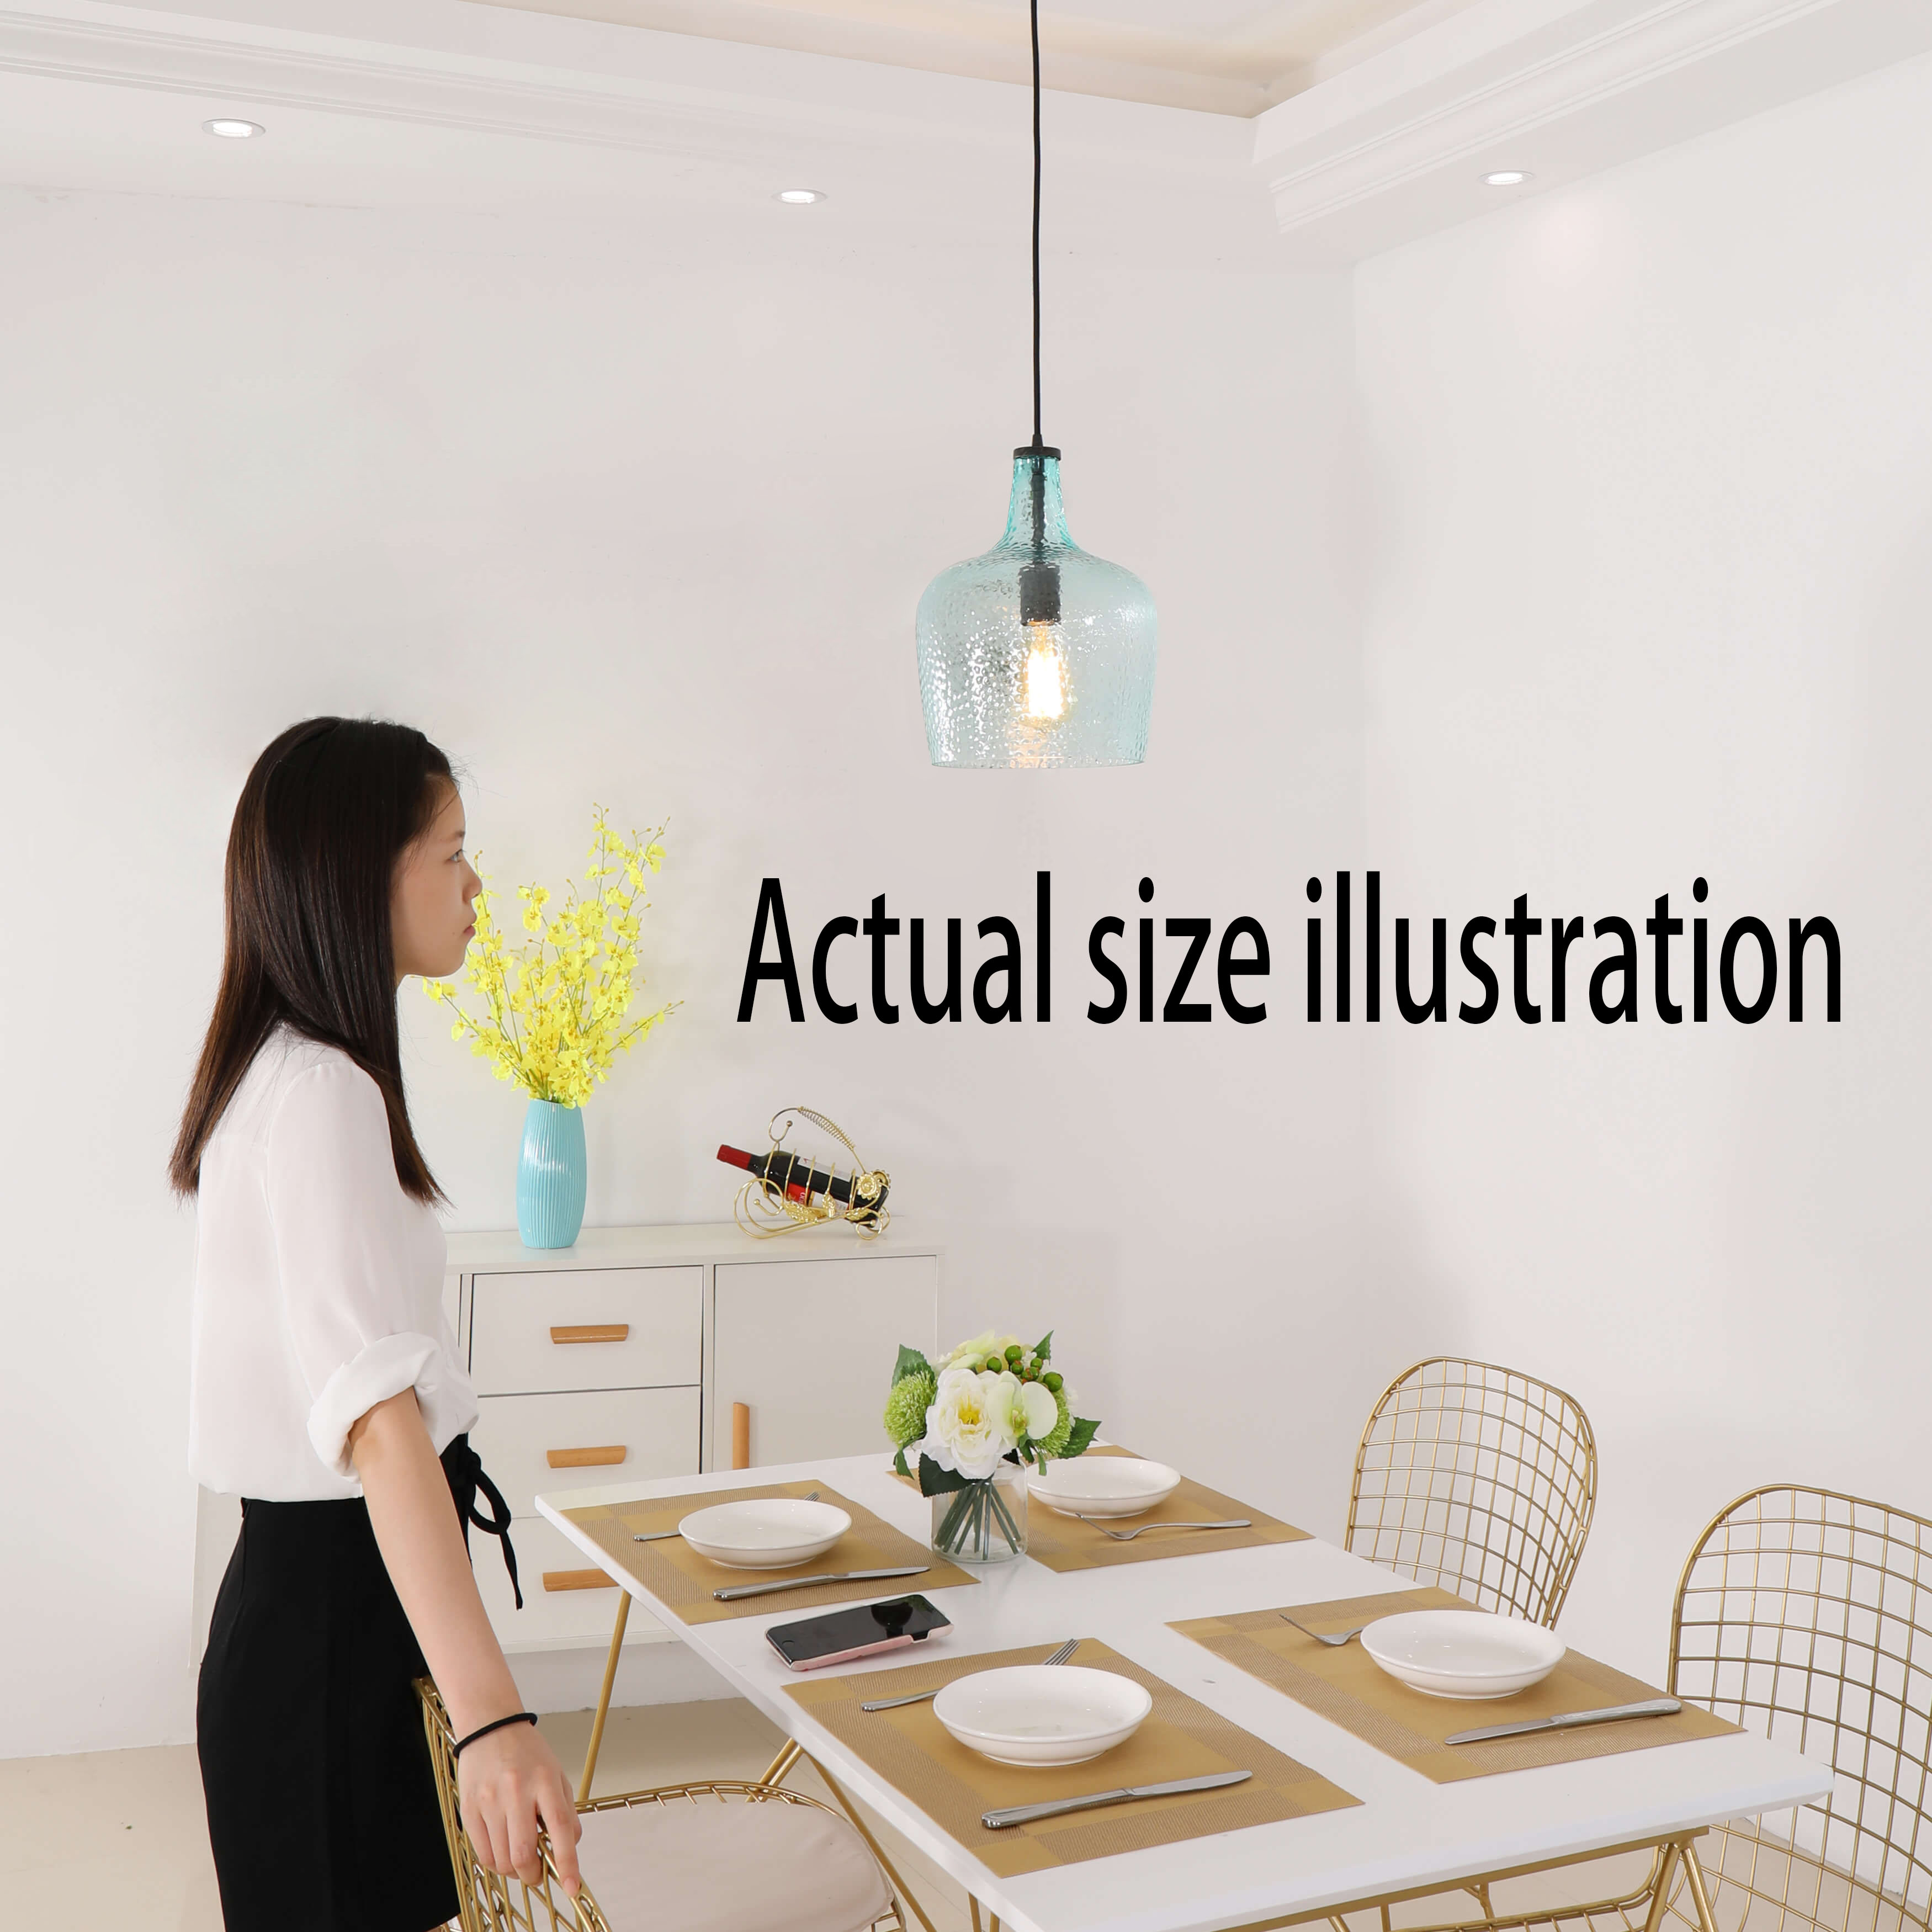 The length of the pendant (from the ceiling plate to the bottom of the glass shade) is 50 inches long